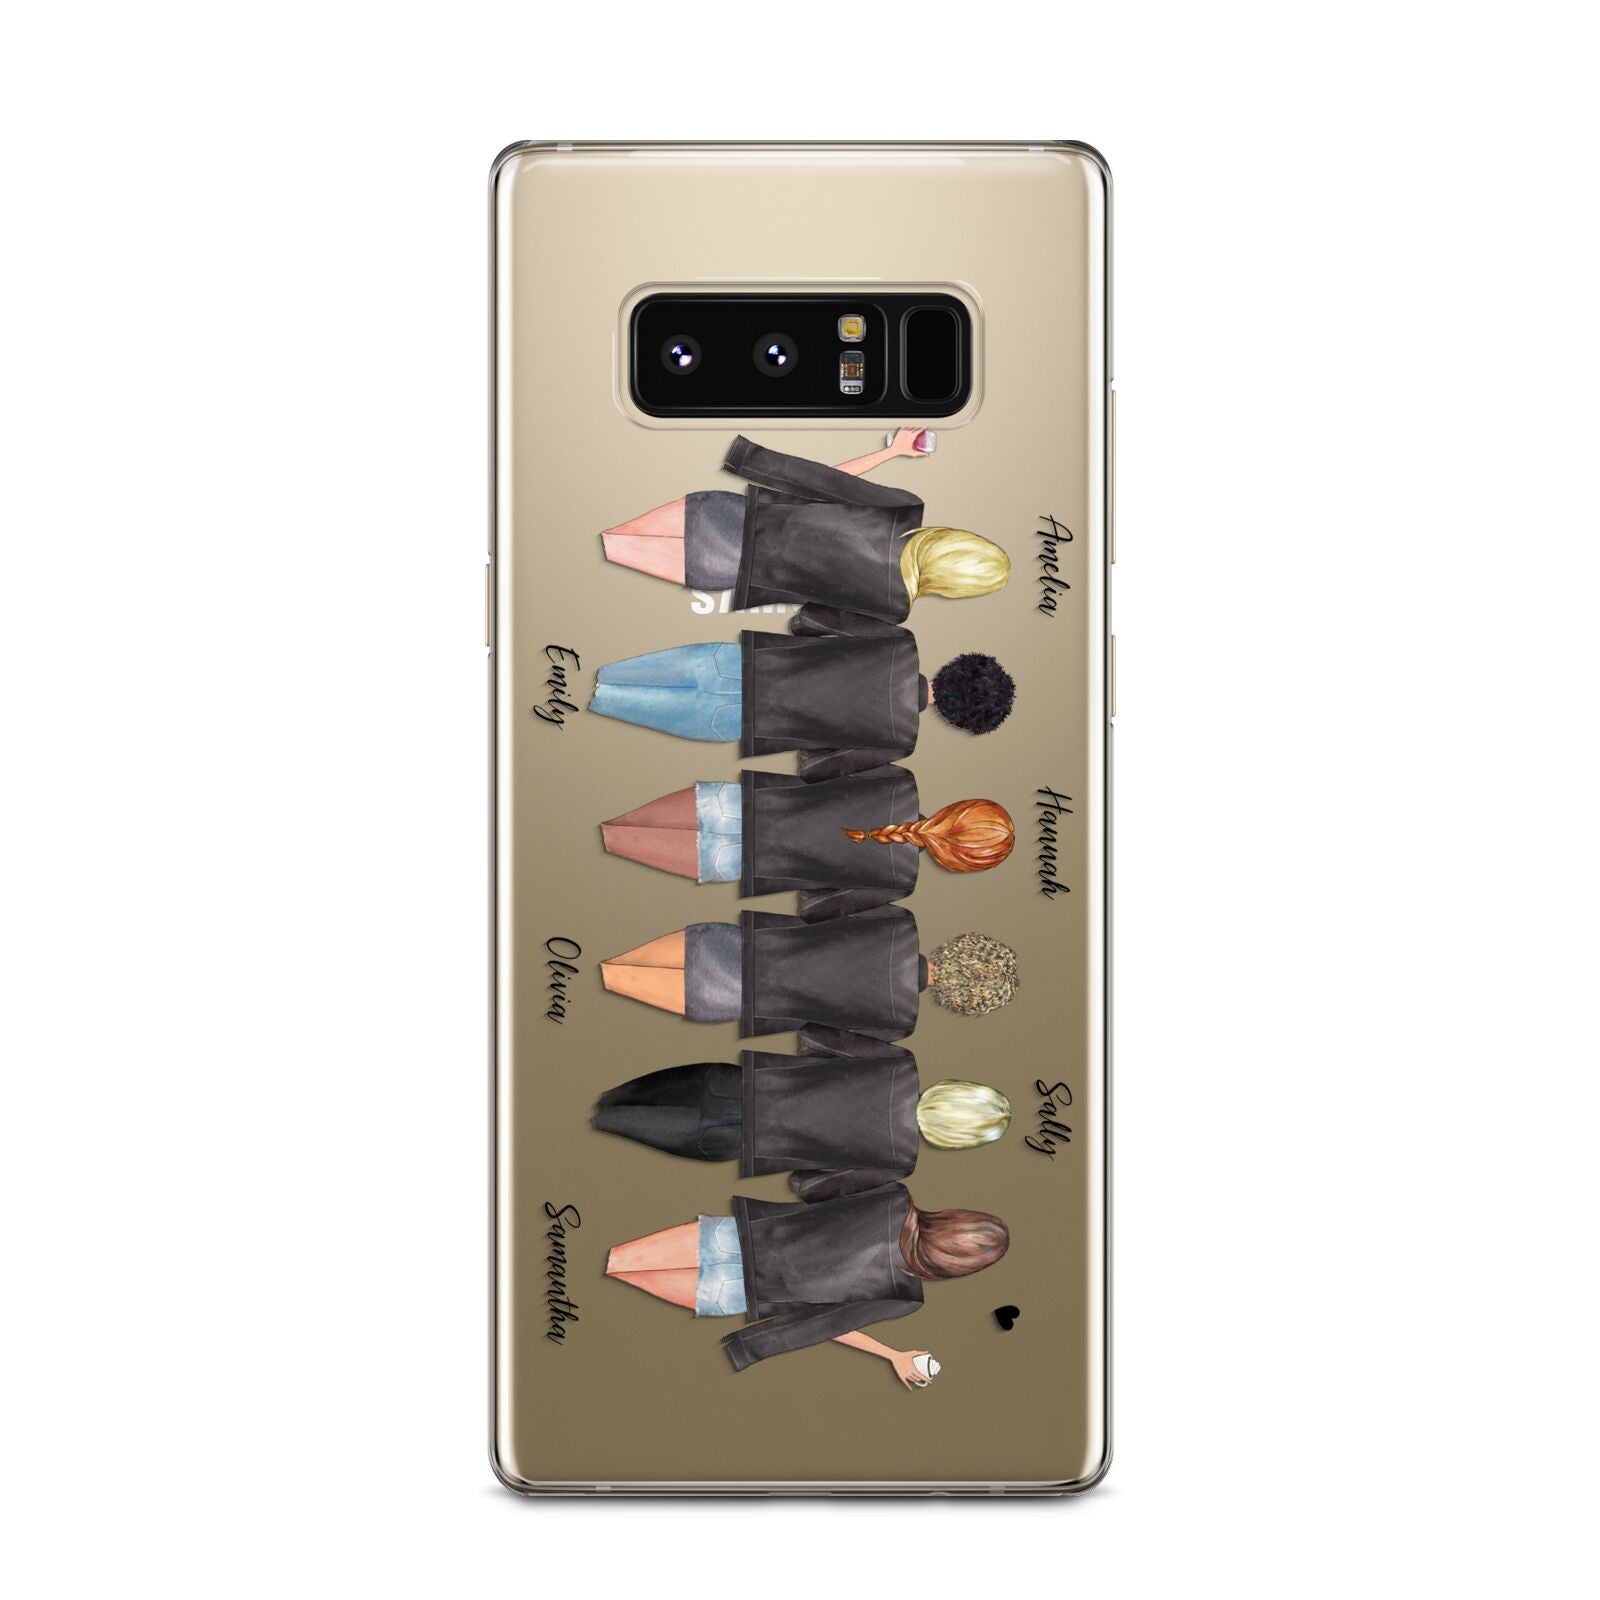 6 Best Friends with Names Samsung Galaxy Note 8 Case